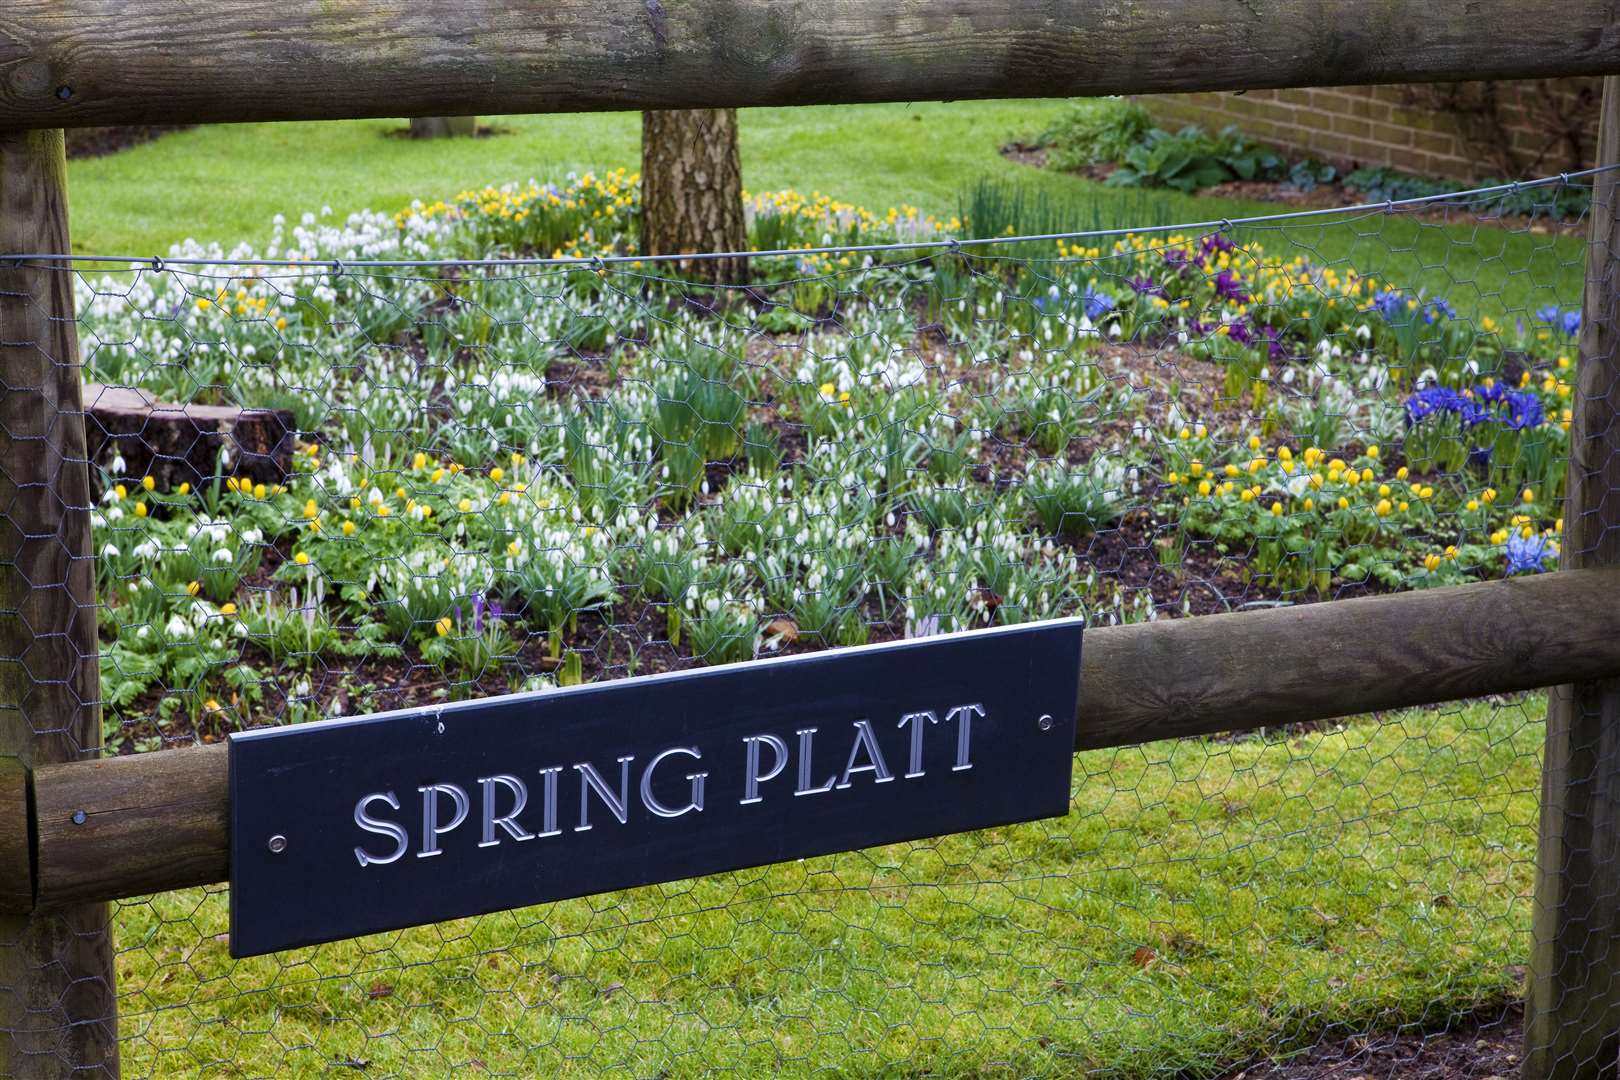 Spring Platt is one of the first snowdrop displays in the county to open this year. Picture: Leigh Clapp